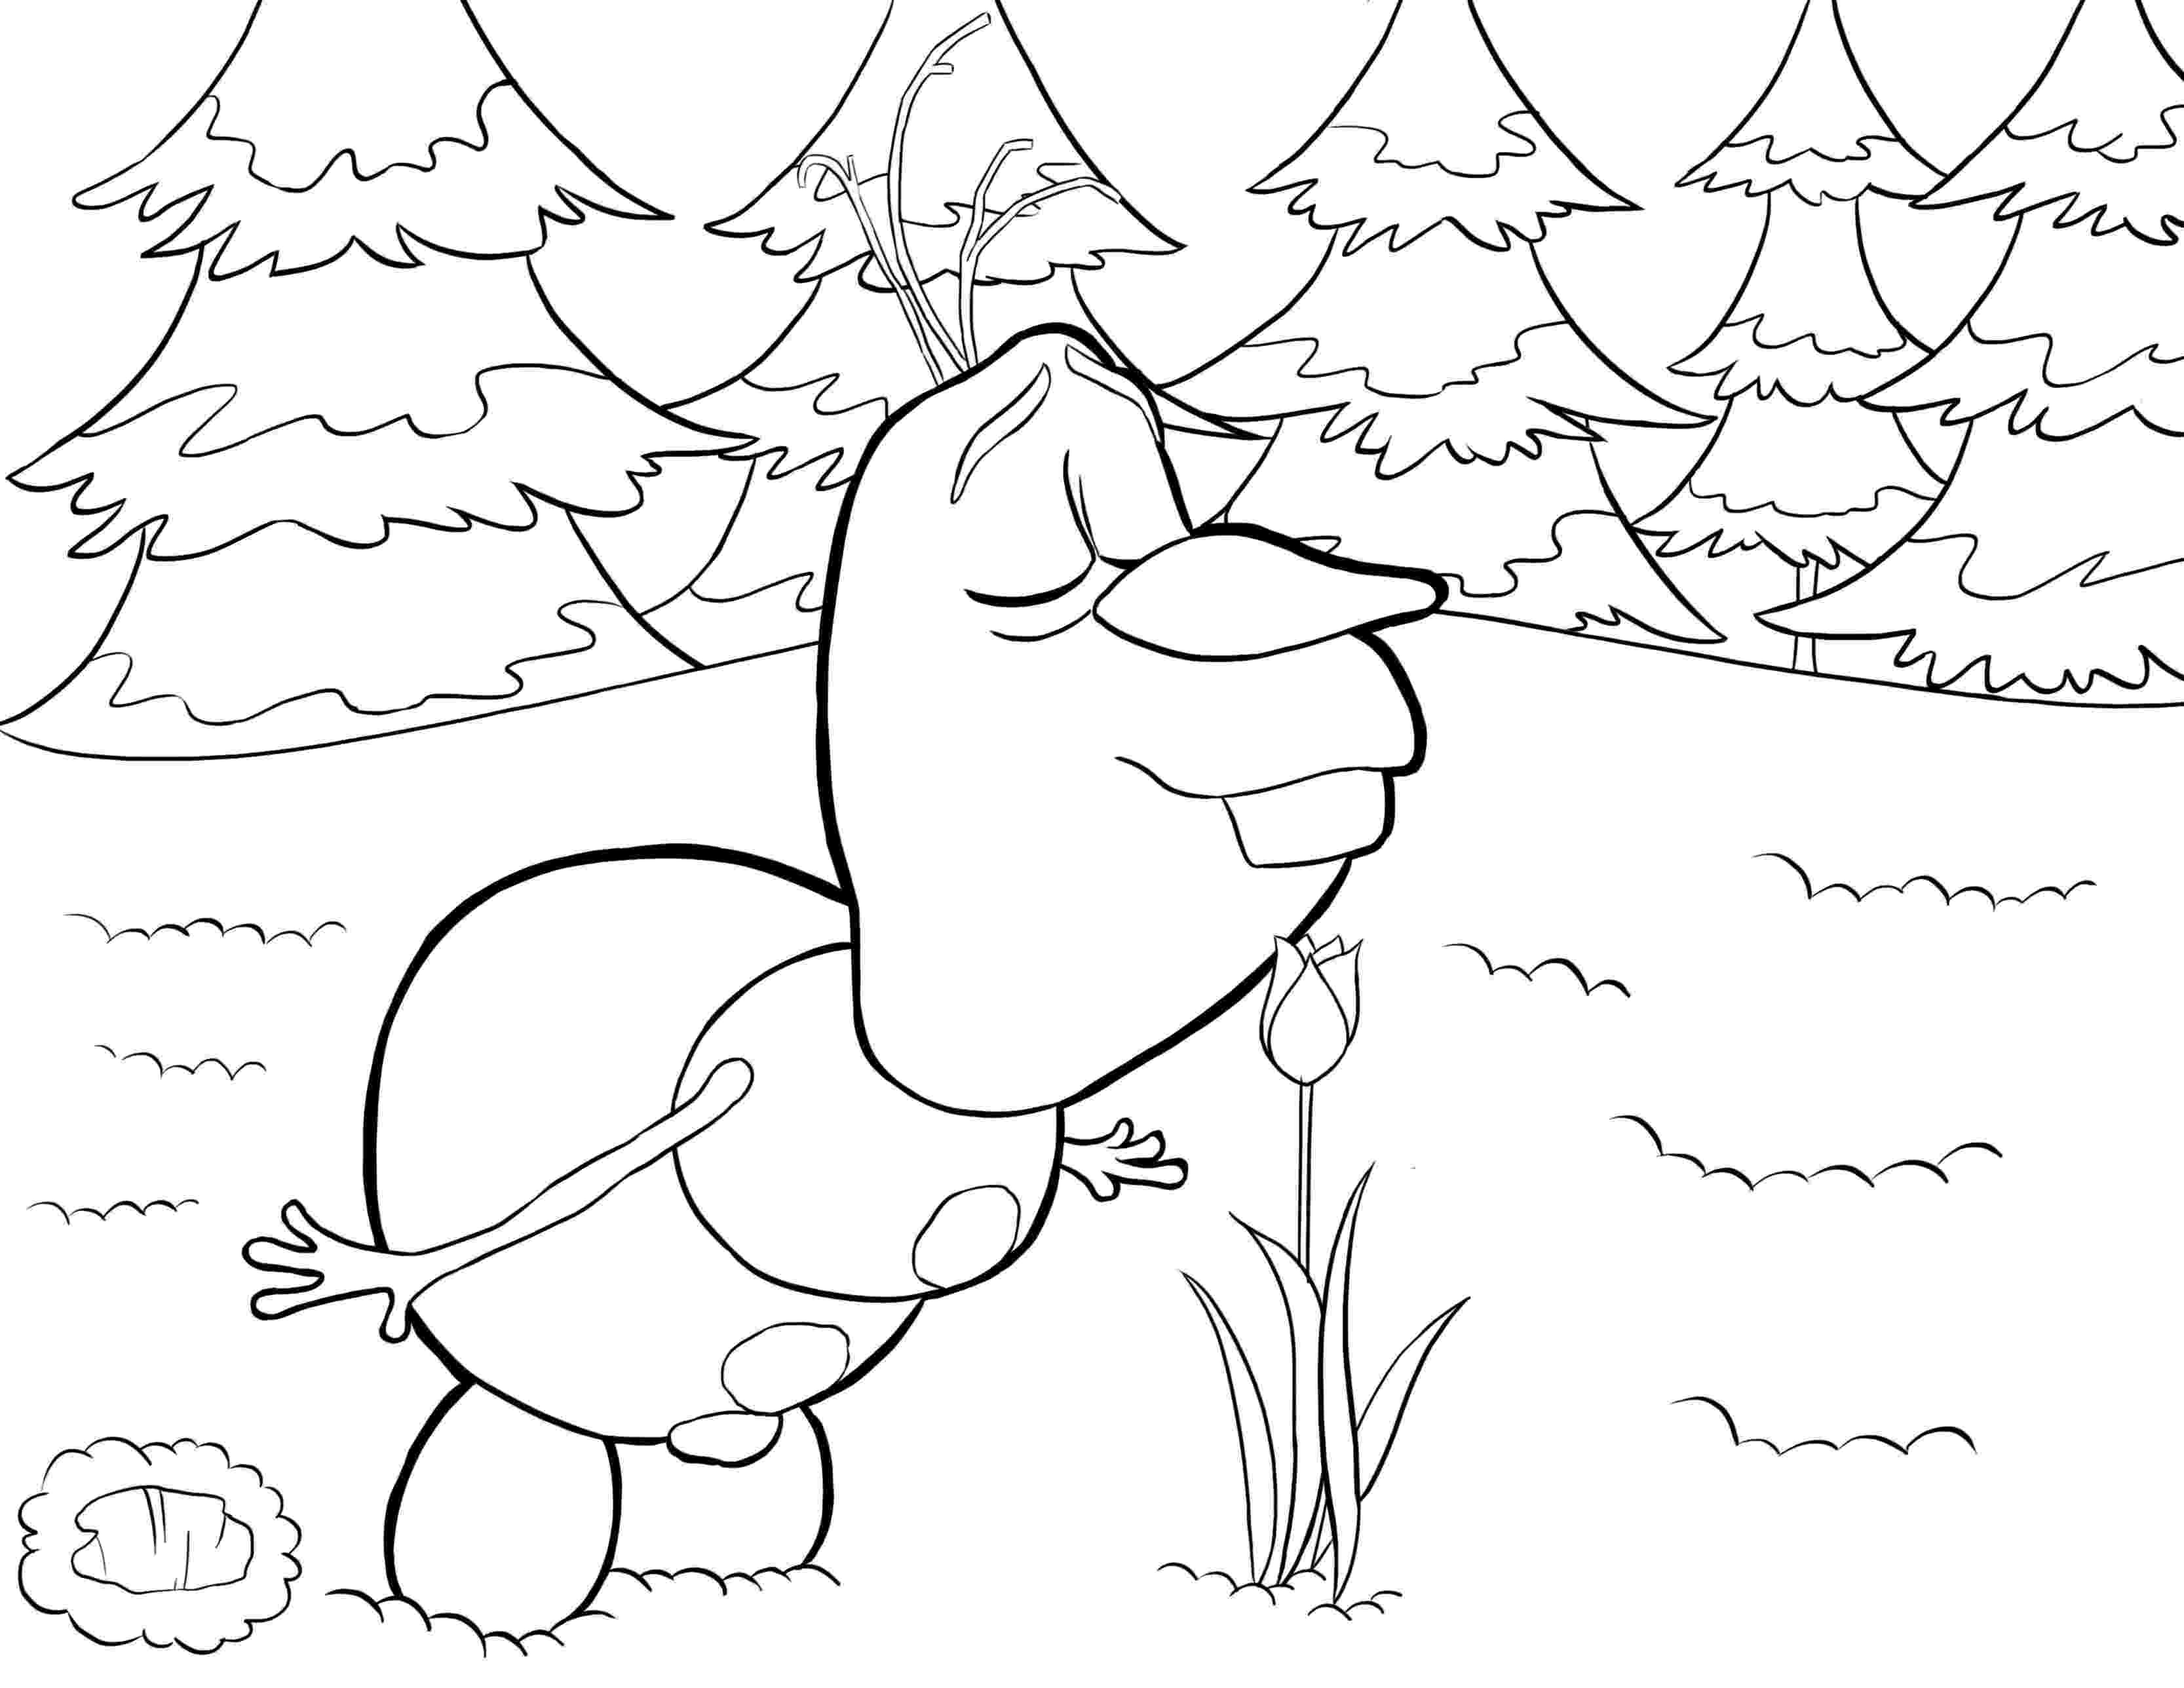 frozen free coloring pages frozen coloring pages animated film characters elsa free pages frozen coloring 